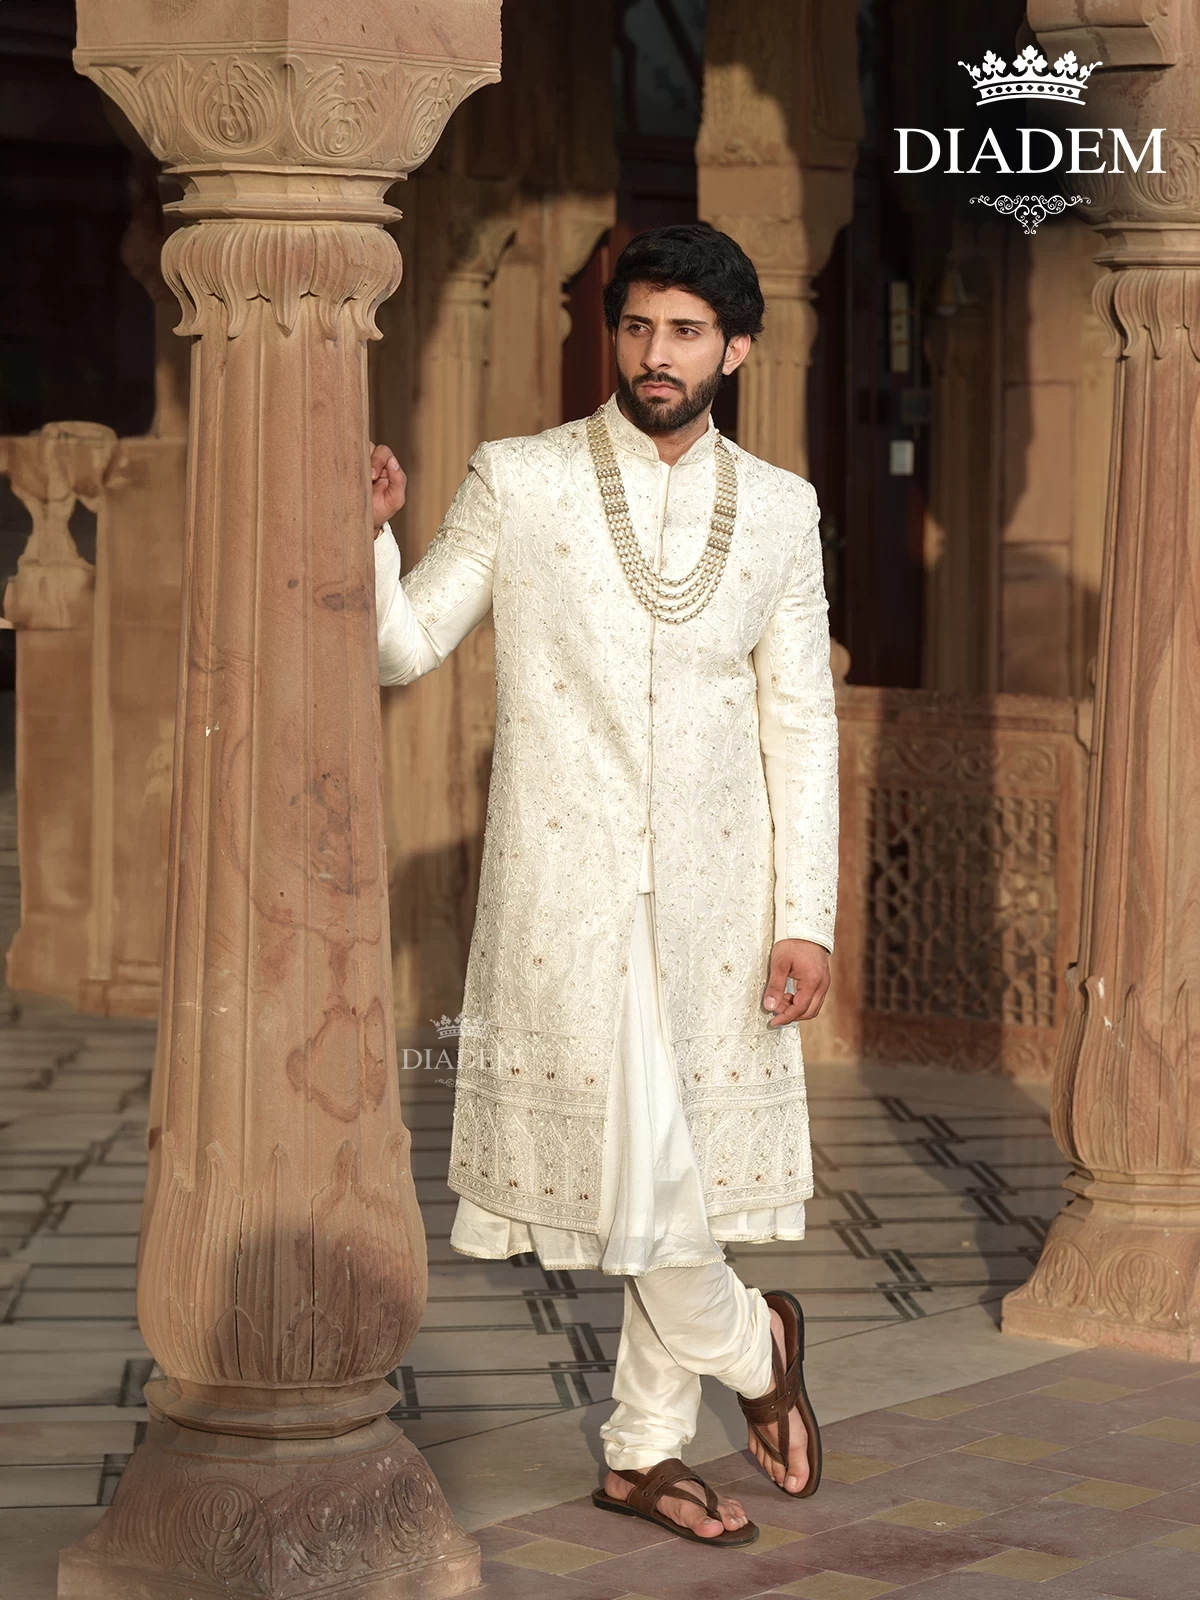 Off-White Raw Silk Sherwani Suit with Threadwork Embroidery and Stones, Paired with Beaded Mala